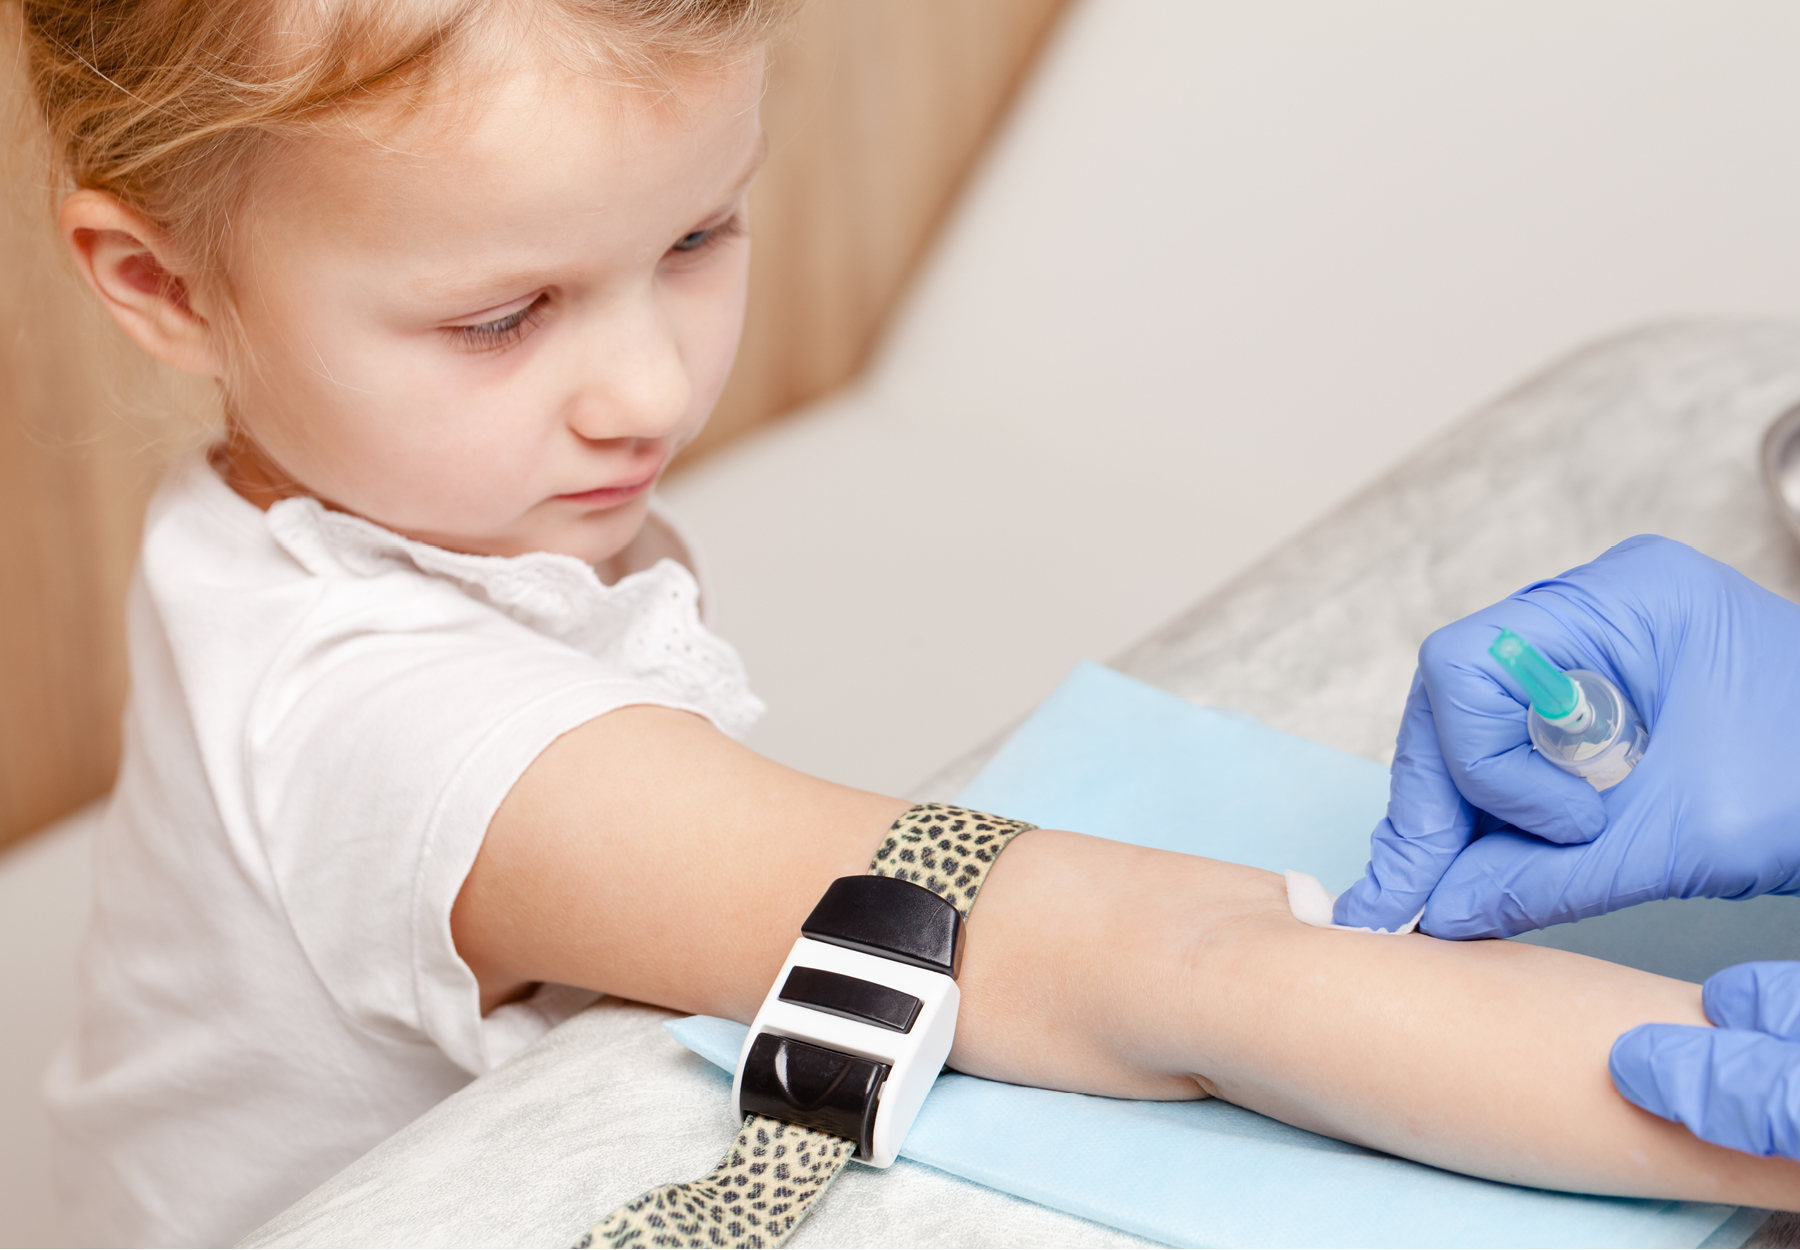 Doctor or nurse disinfecting little girl's arm preparing to take a blood sample from her vein. Pediatric venipuncture or venepuncture procedure. iStock image.